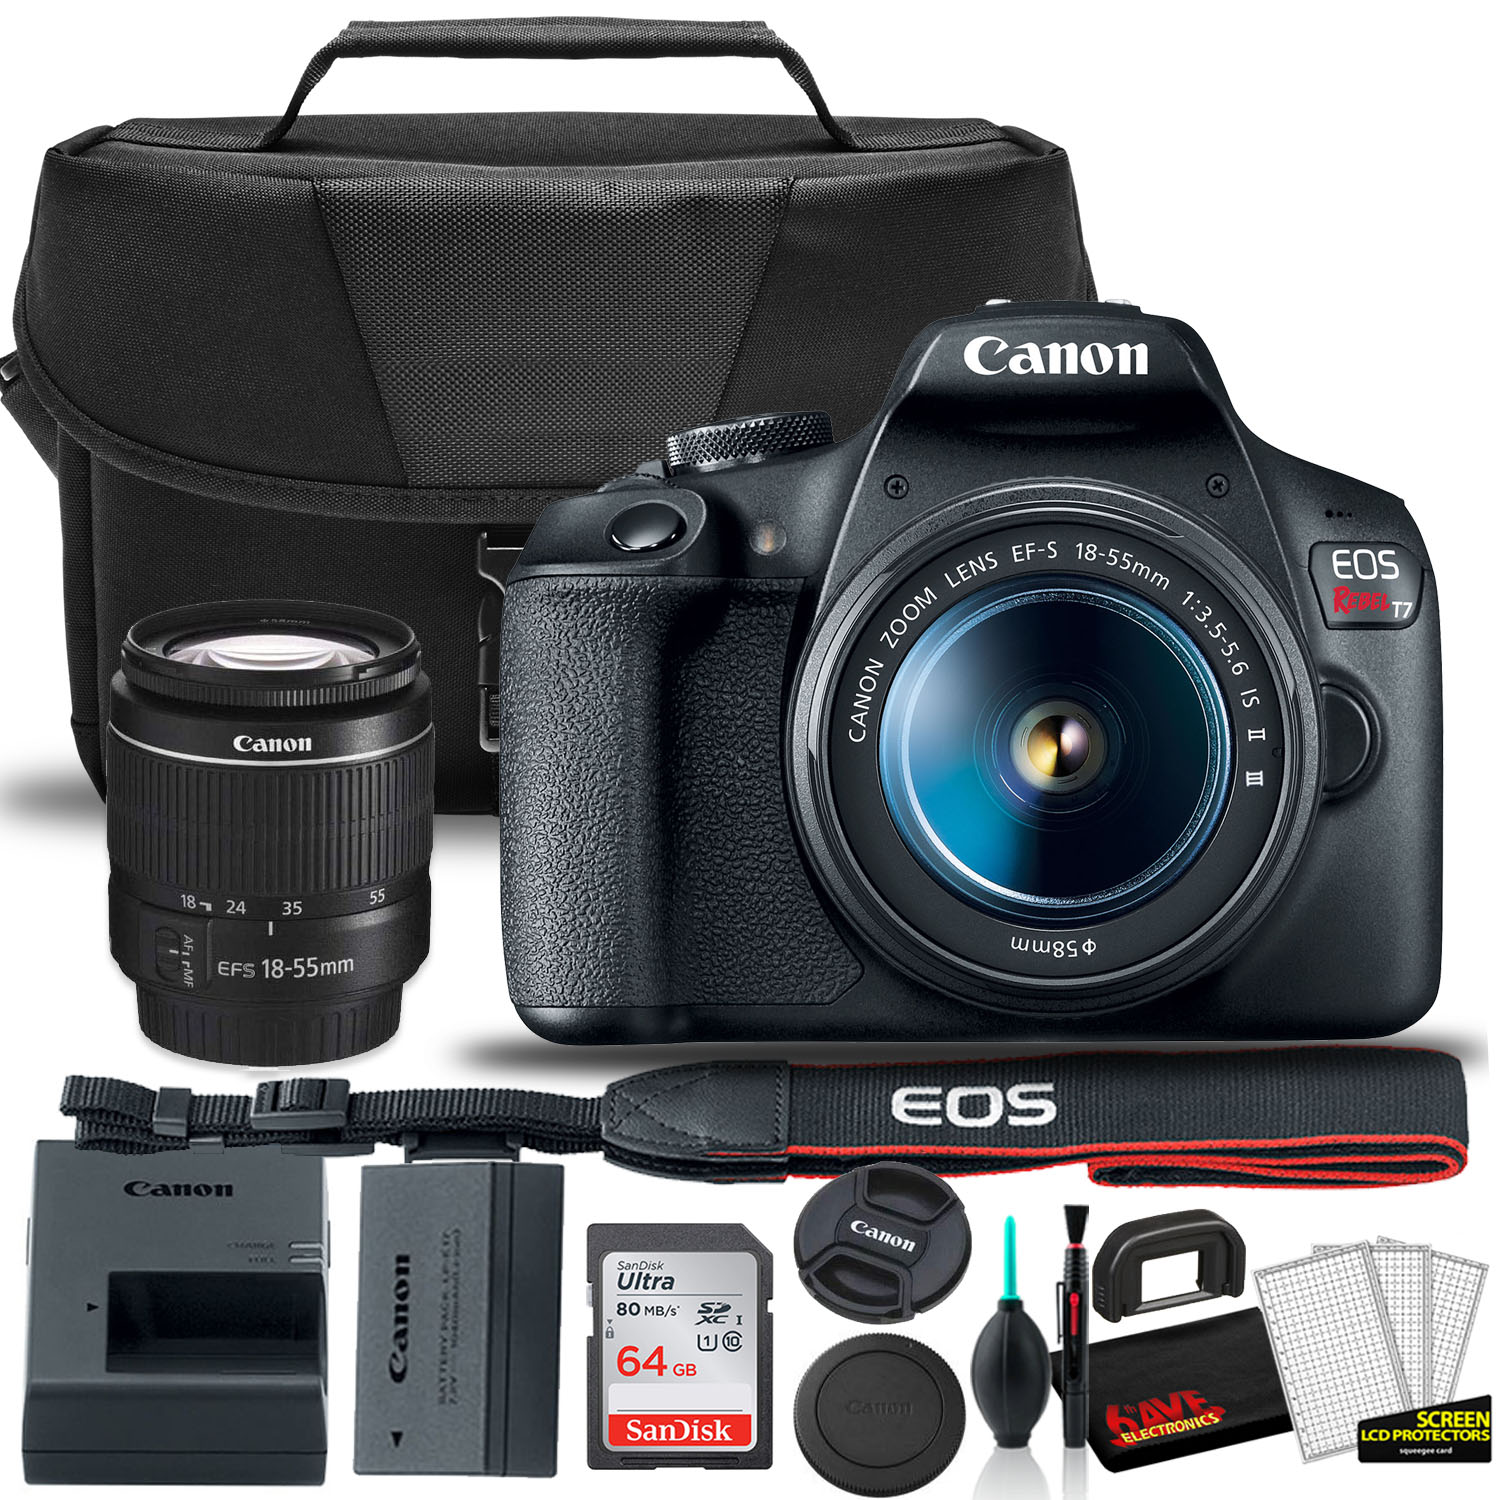 Canon EOS Rebel T7 DSLR Camera with 18-55mm Lens, Wi-Fi and Accessories: Bag, 64GB Card and More (New) - image 1 of 6